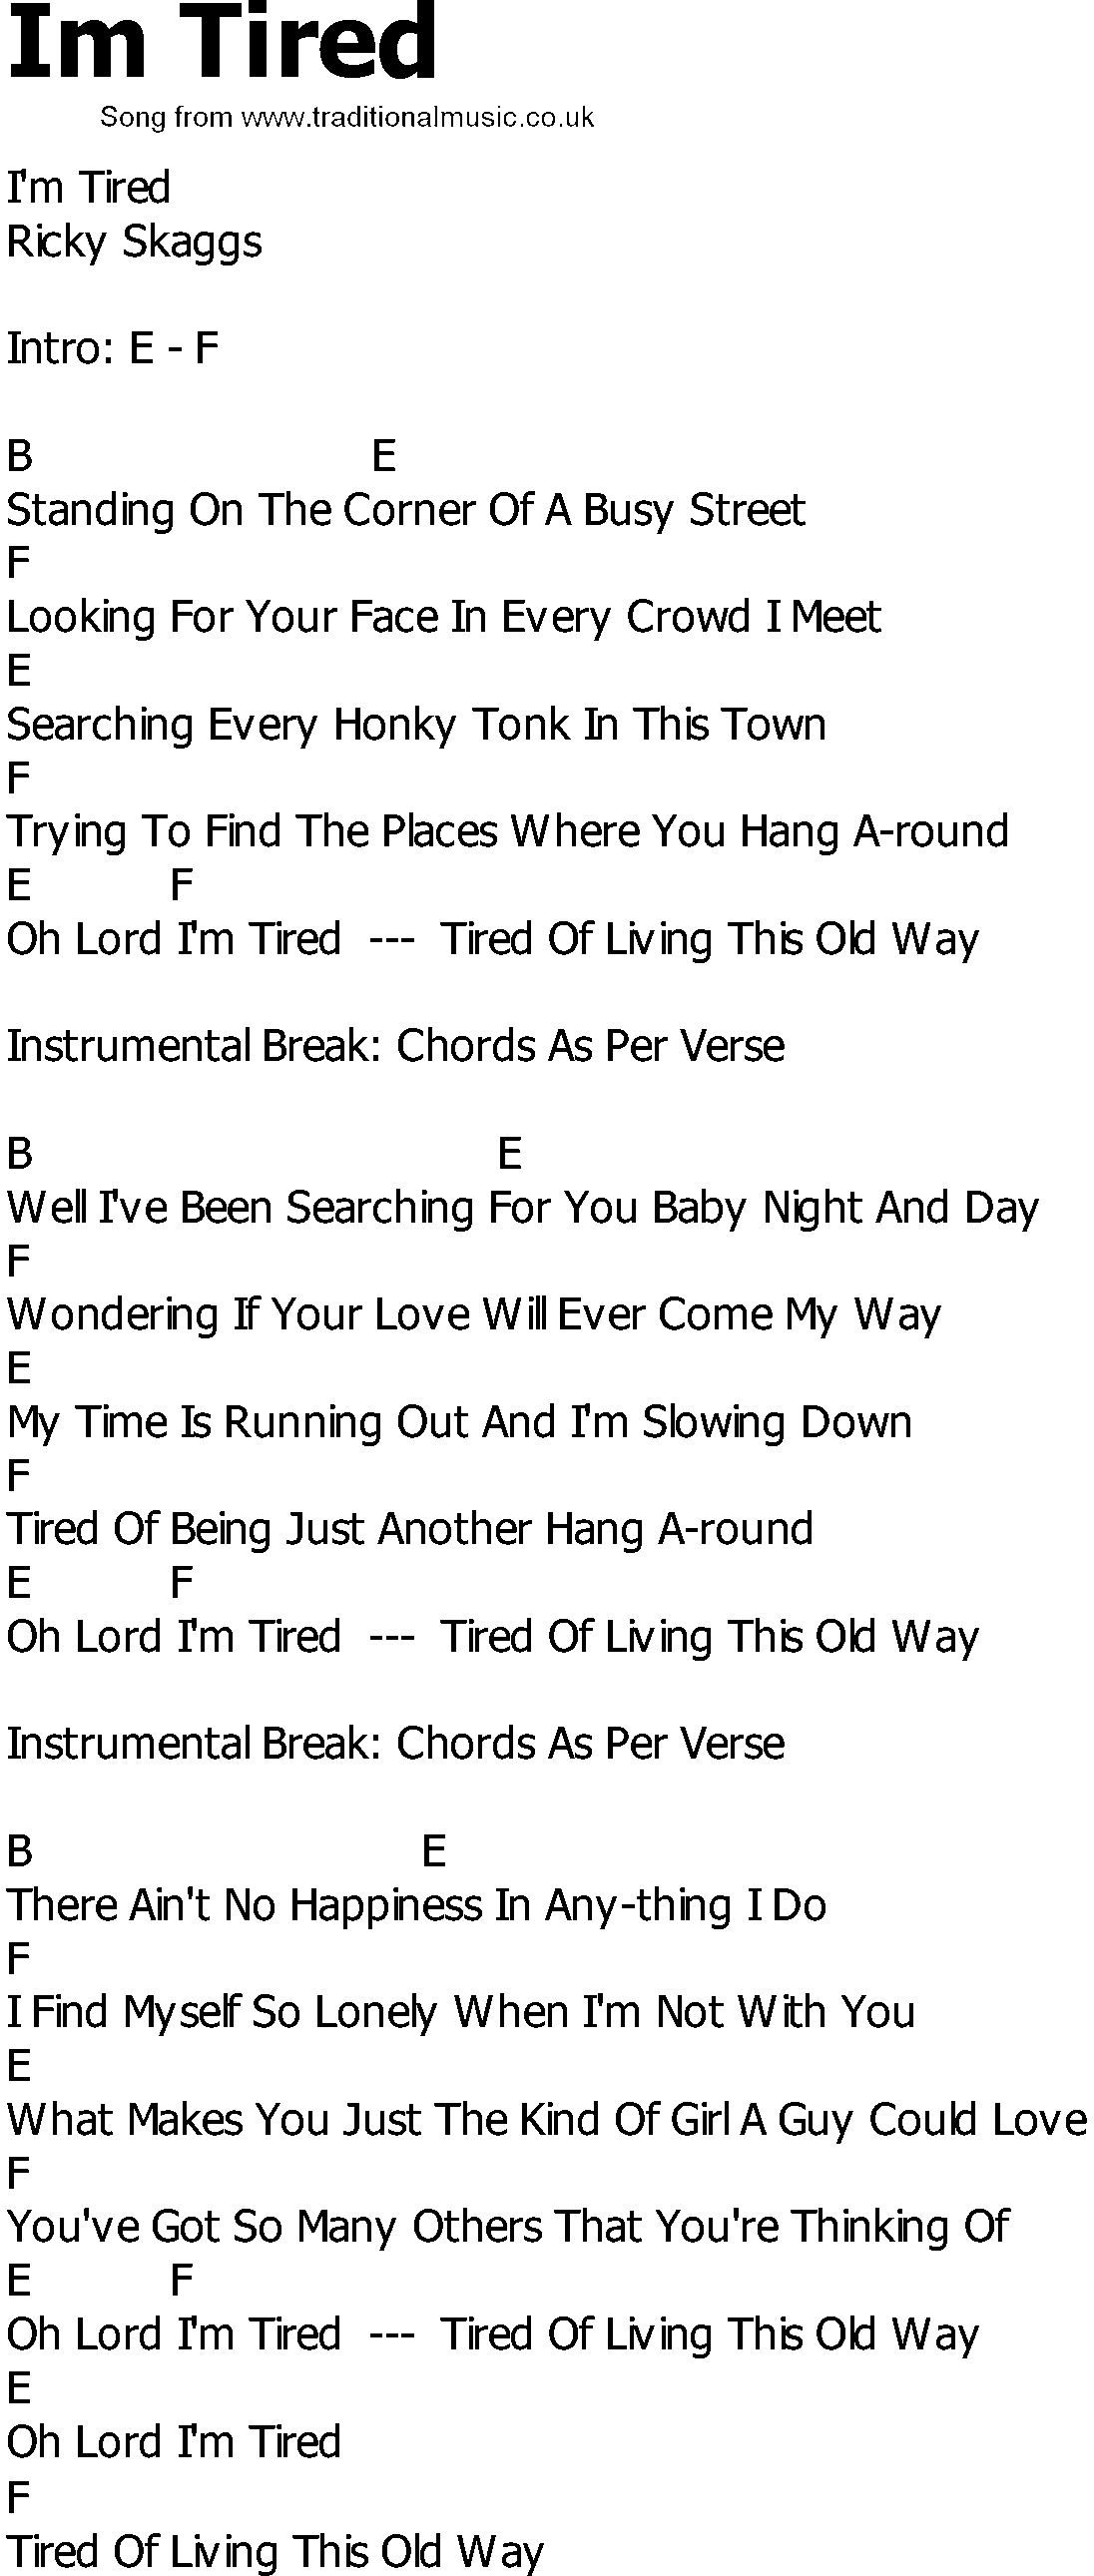 Old Country song lyrics with chords - Im Tired